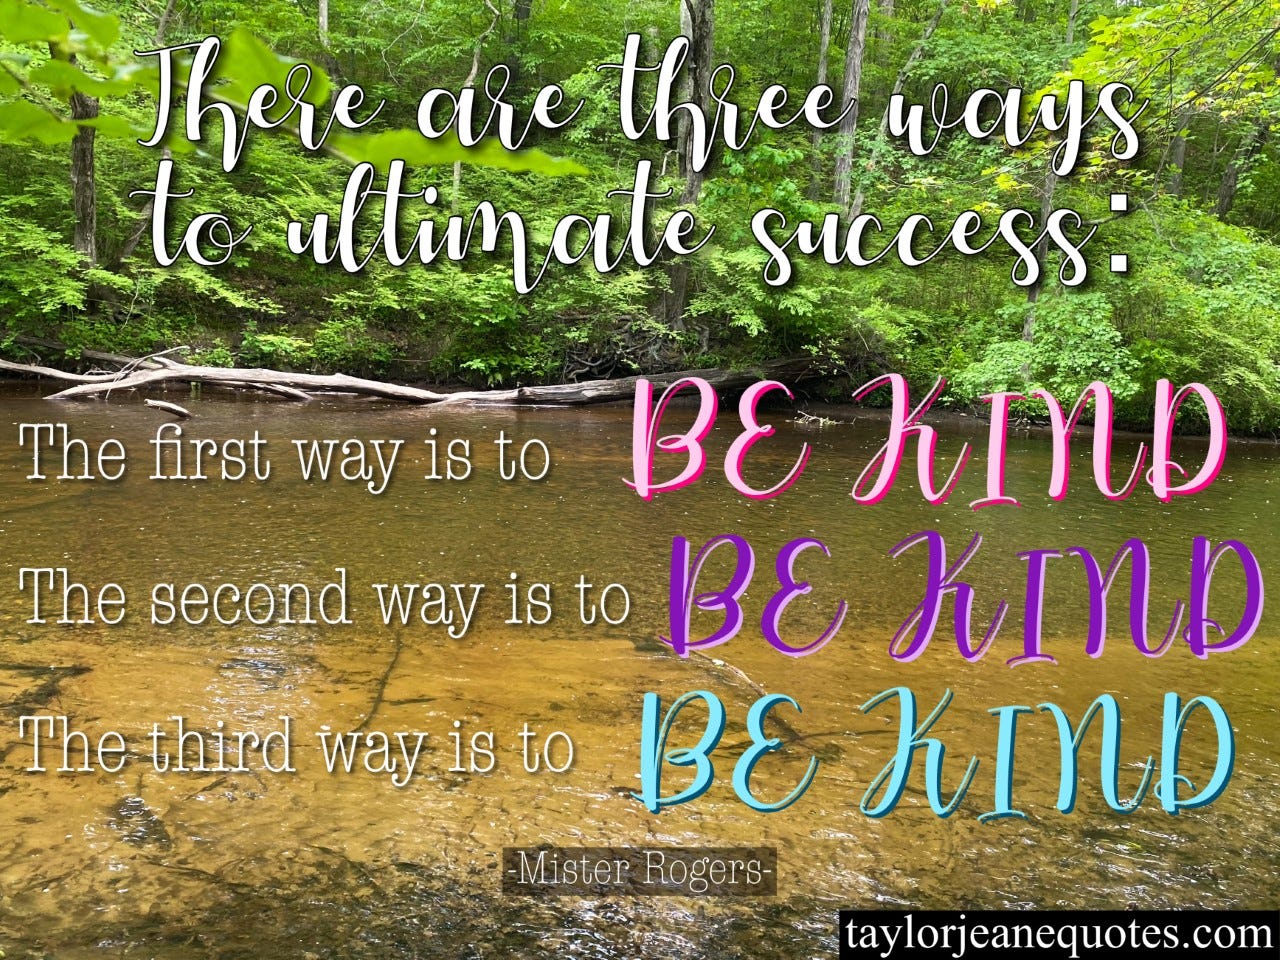 taylor jeane quotes, taylor jeane, taylor wilson, free quote of the day, inspirational quotes, motivational quotes, mister rogers quotes, mister rogers, mr rogers quotes, mr rogers, kindness quotes, respect quotes, peace quotes, world peace quotes, success quotes, life quotes, compassion quotes, inspirational quotes, positive quotes, sweet quotes, three ways to success quote, secret quotes